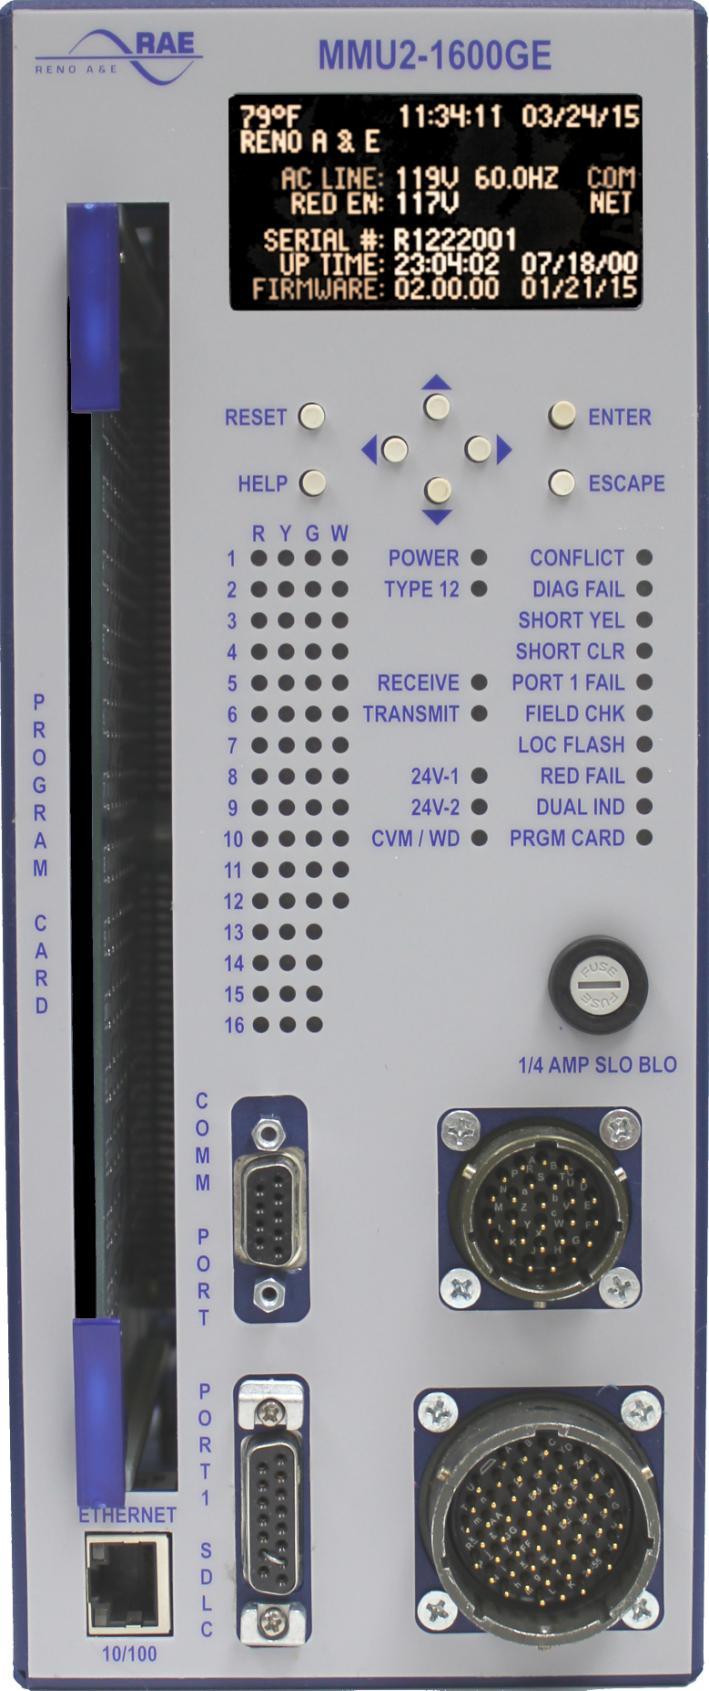 4.0 USE R I N T E R F A C E Programming Card Channel Compatibility Minimum Flash Minimum Yellow Clearance Disable CVM Latch 24V Monitor Latch Integral EEPROM Reset Button Press to attempt to clear